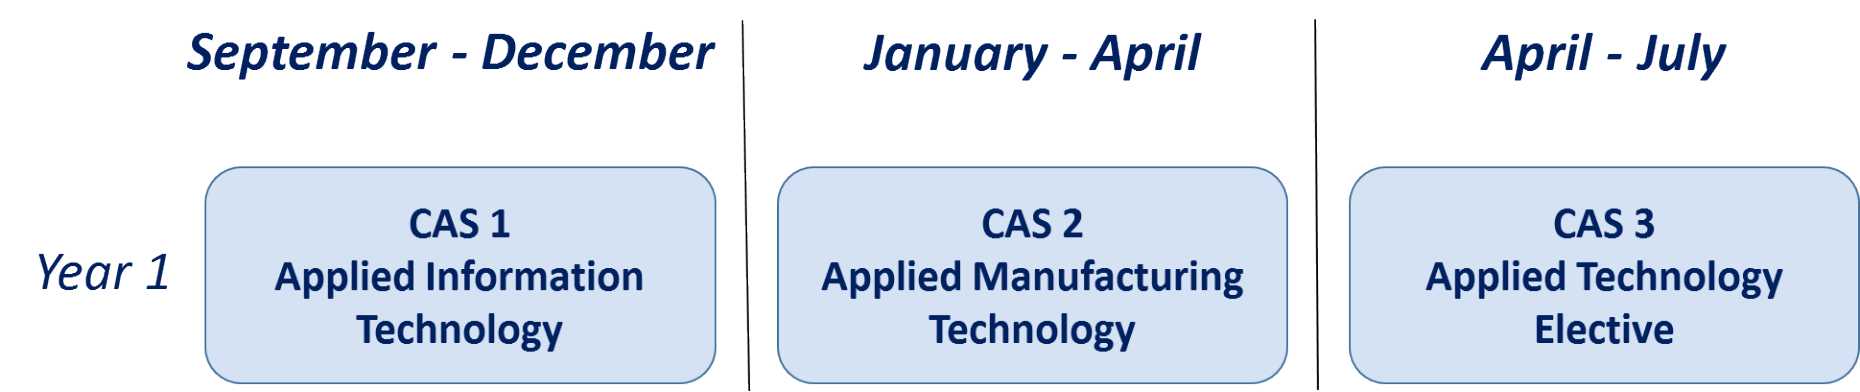 Image showing first year sequence of MAS AT. First year September to December is CAS 1 Applied Information Technology. First Year January to April is CAS 2 Applied Manufacturing Technology. First year April to July is CAS 3 Applied Technology Elective. 